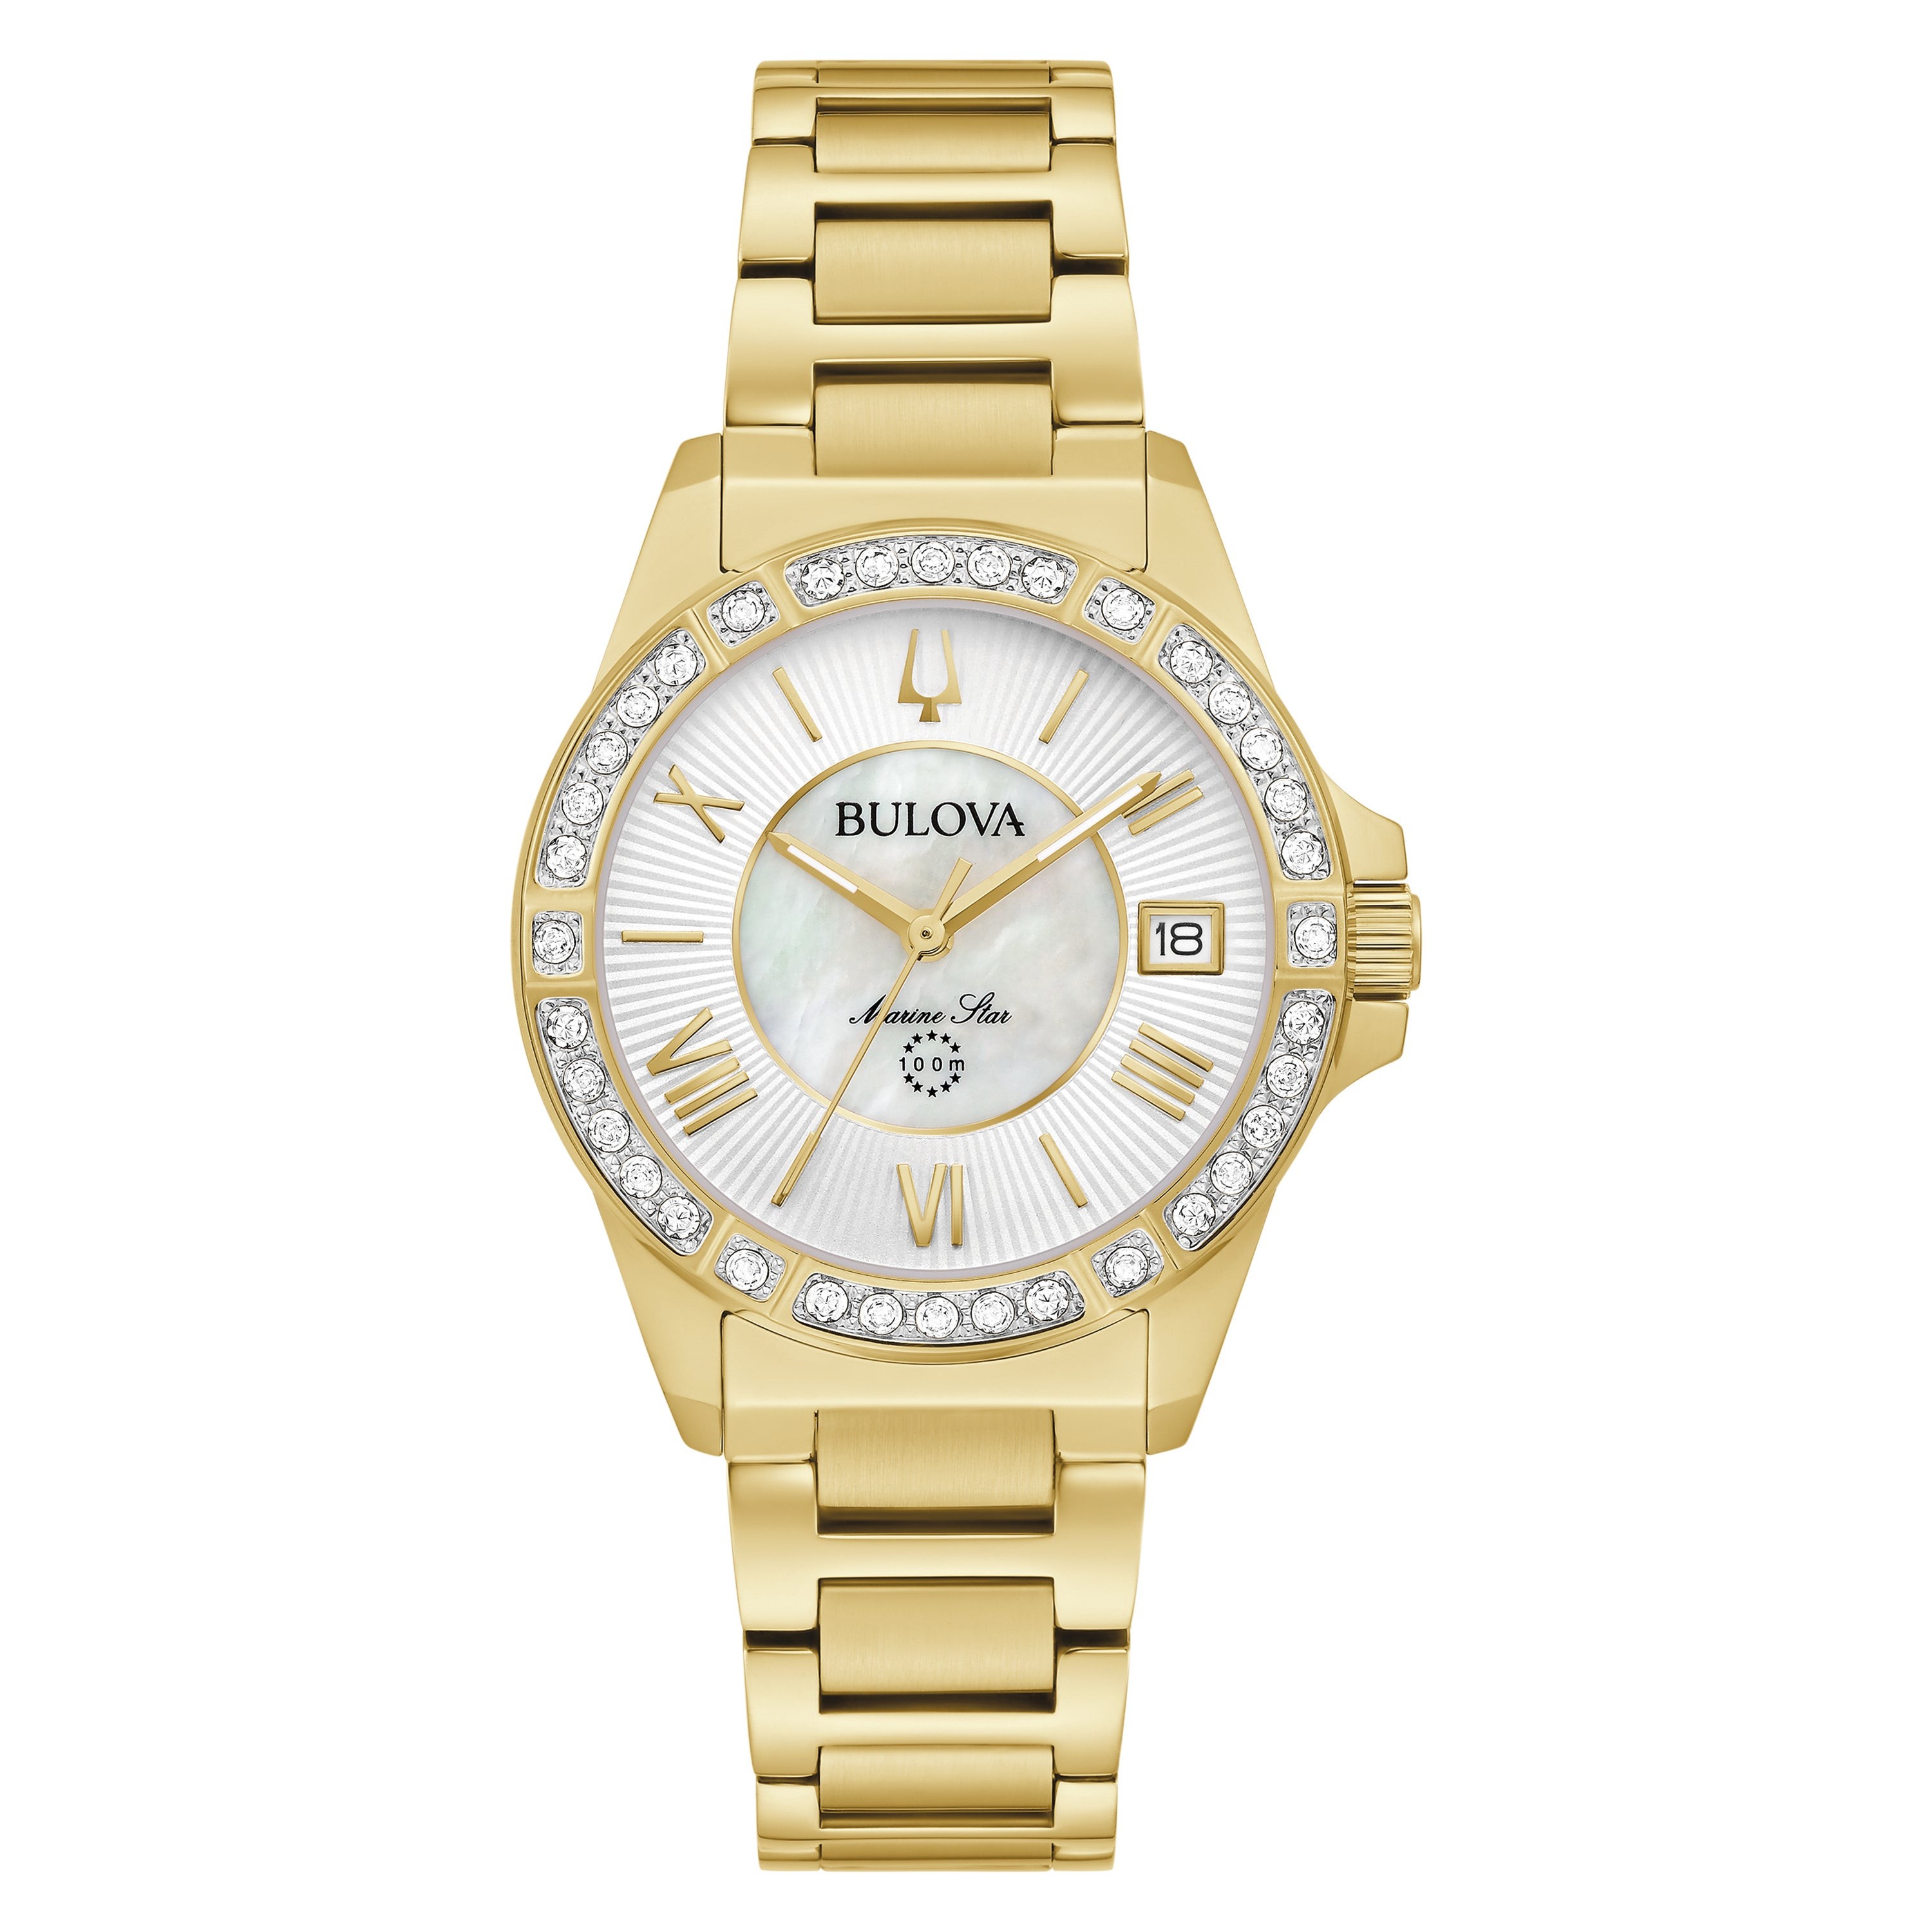 Ladies' Marine Star Gold-Tone Stainless Steel Watch, Mother-of-Pearl Dial